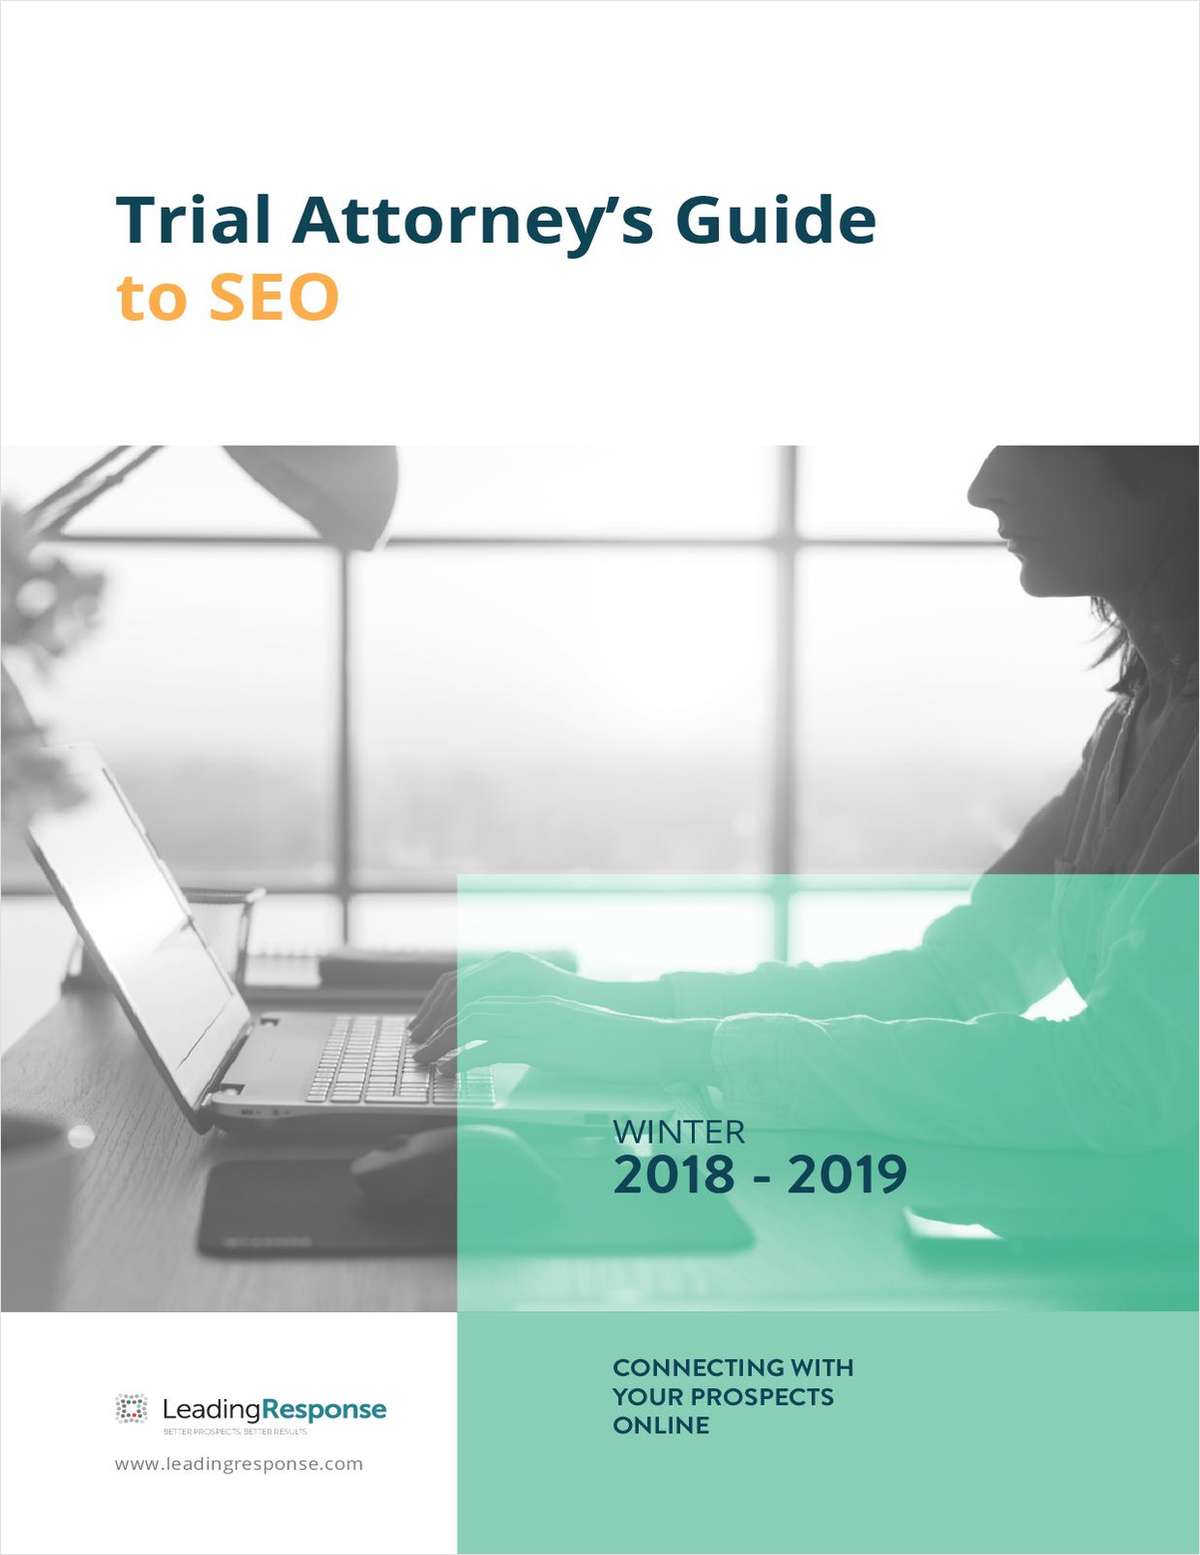 The Trial Attorney's Guide to SEO